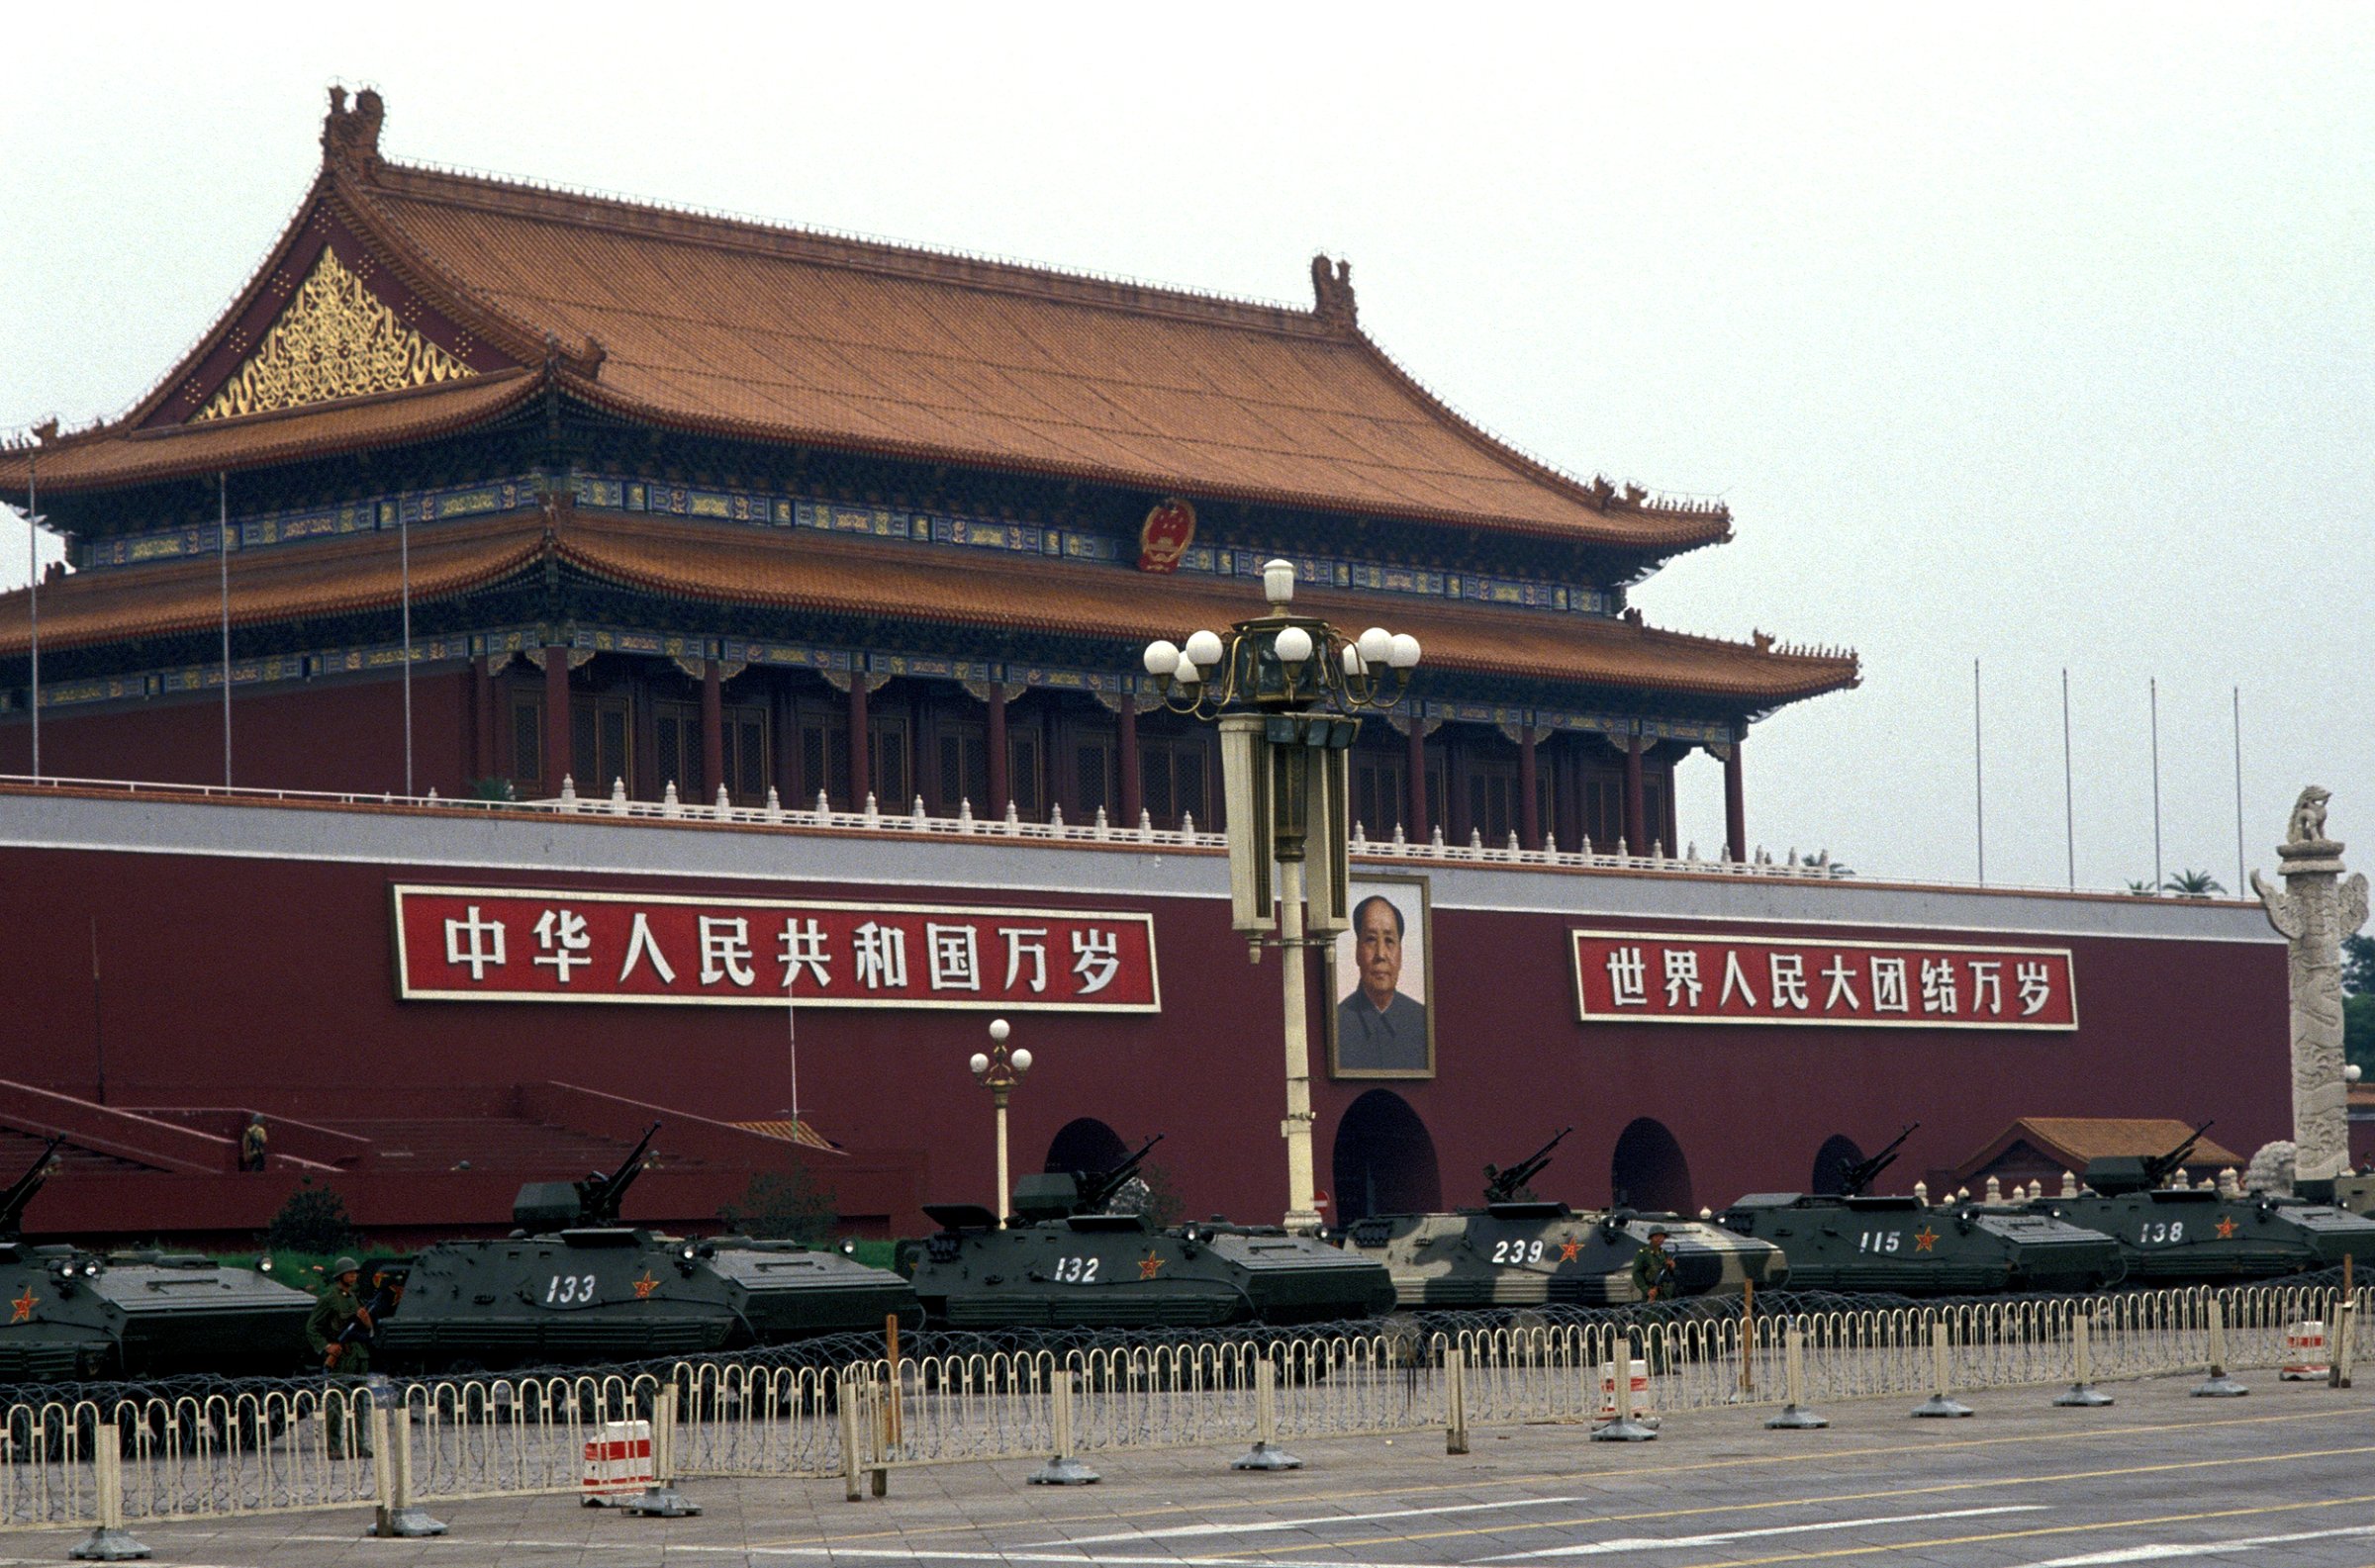 The tanks on Tiananmen Square in Beijing China on June 11, 1989.